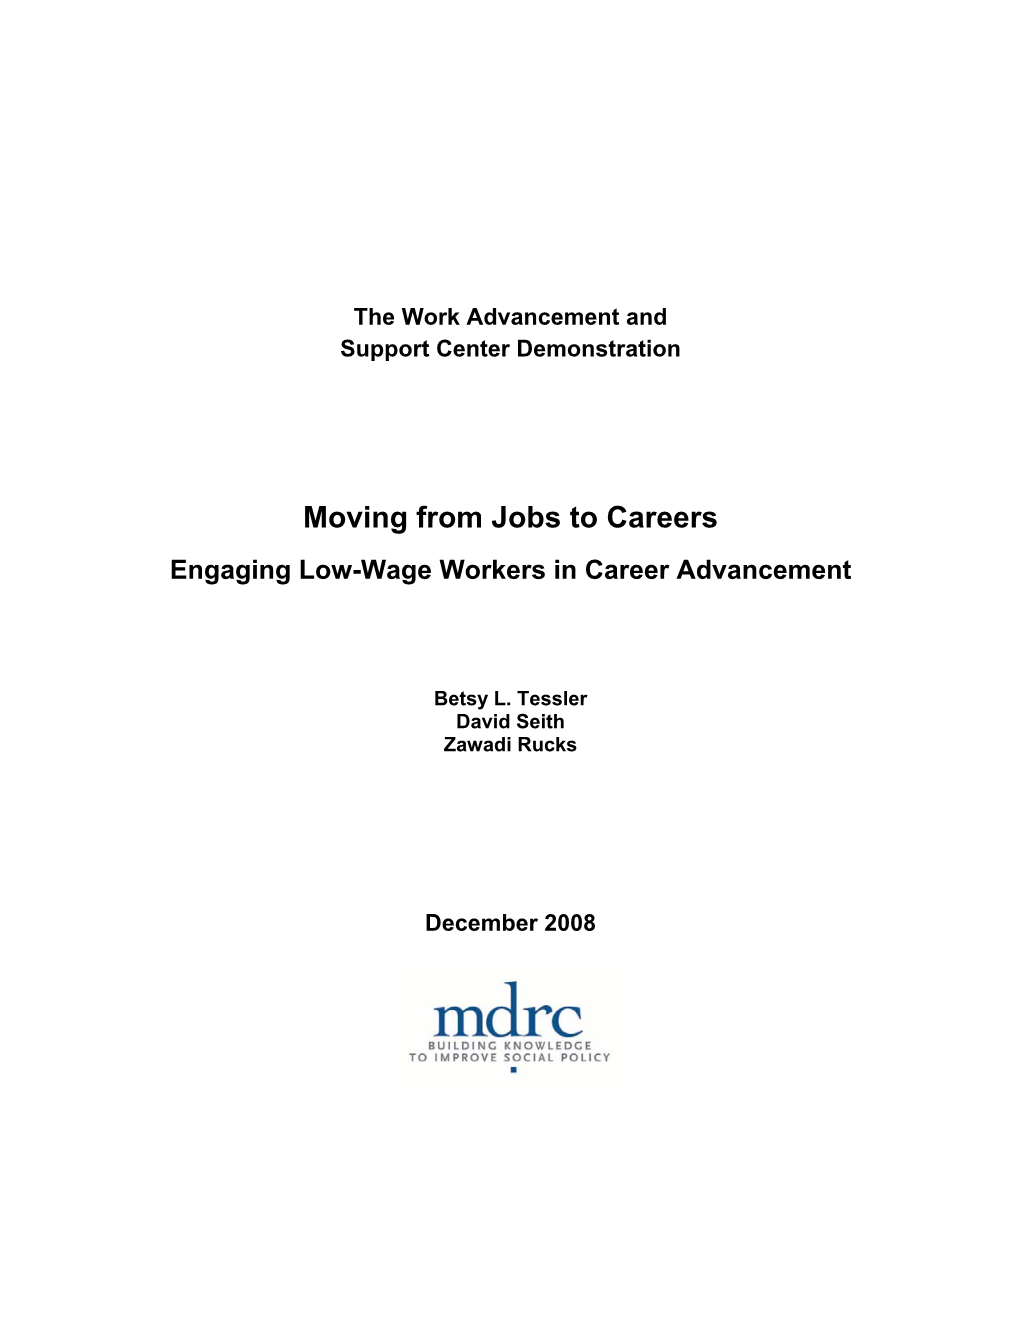 Engaging Low-Wage Workers in Career Advancement by Betsy L. Tessler